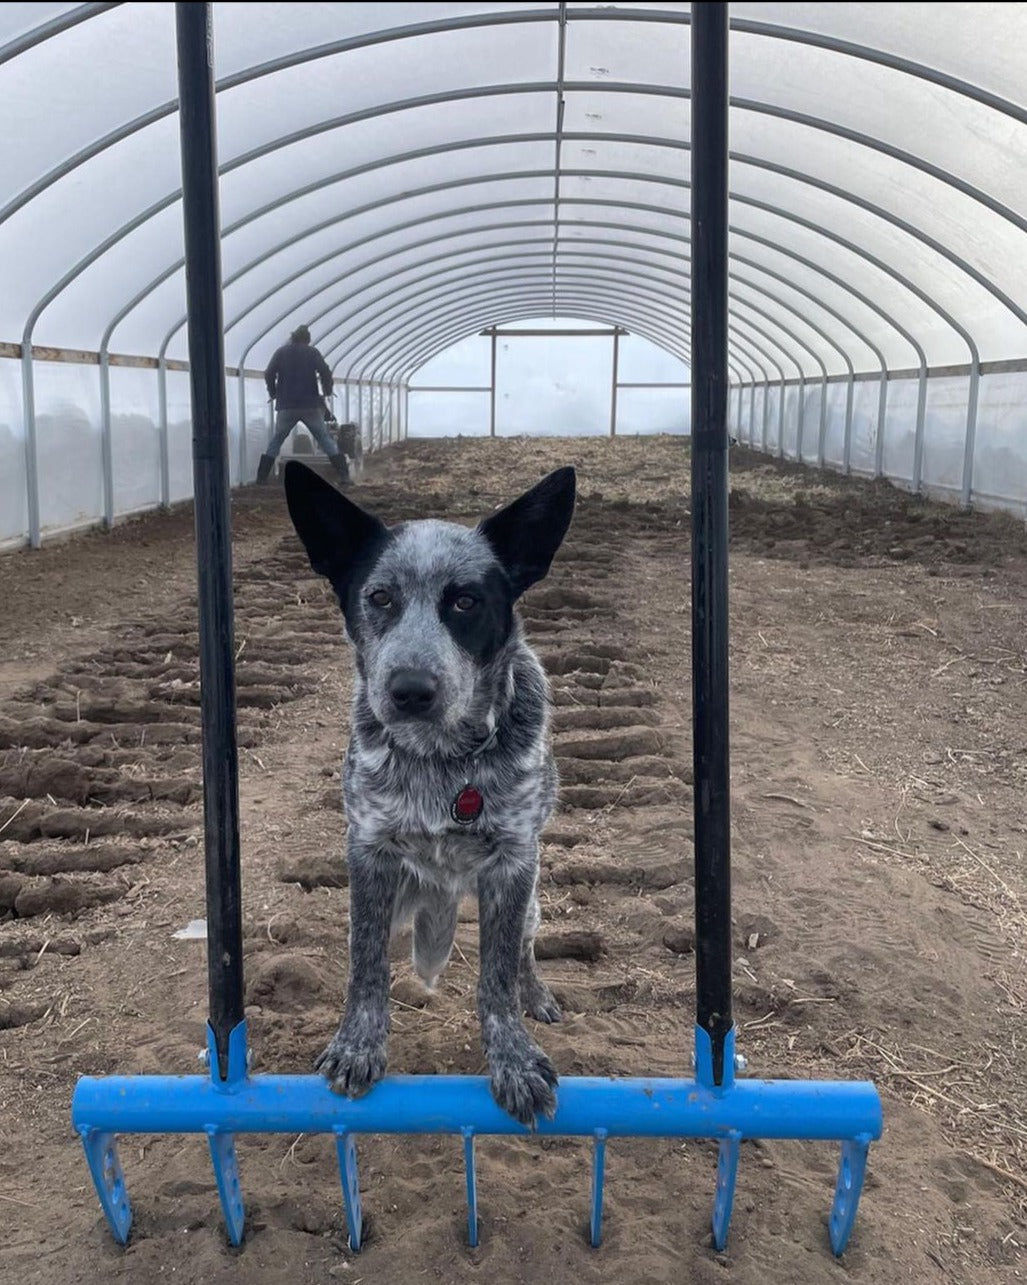 Prepping the soil with the 7 tine Market Gardener Treadlite Broadfork, say goodbye to heavy machines - even our dogs approve of human powered cultivation. 